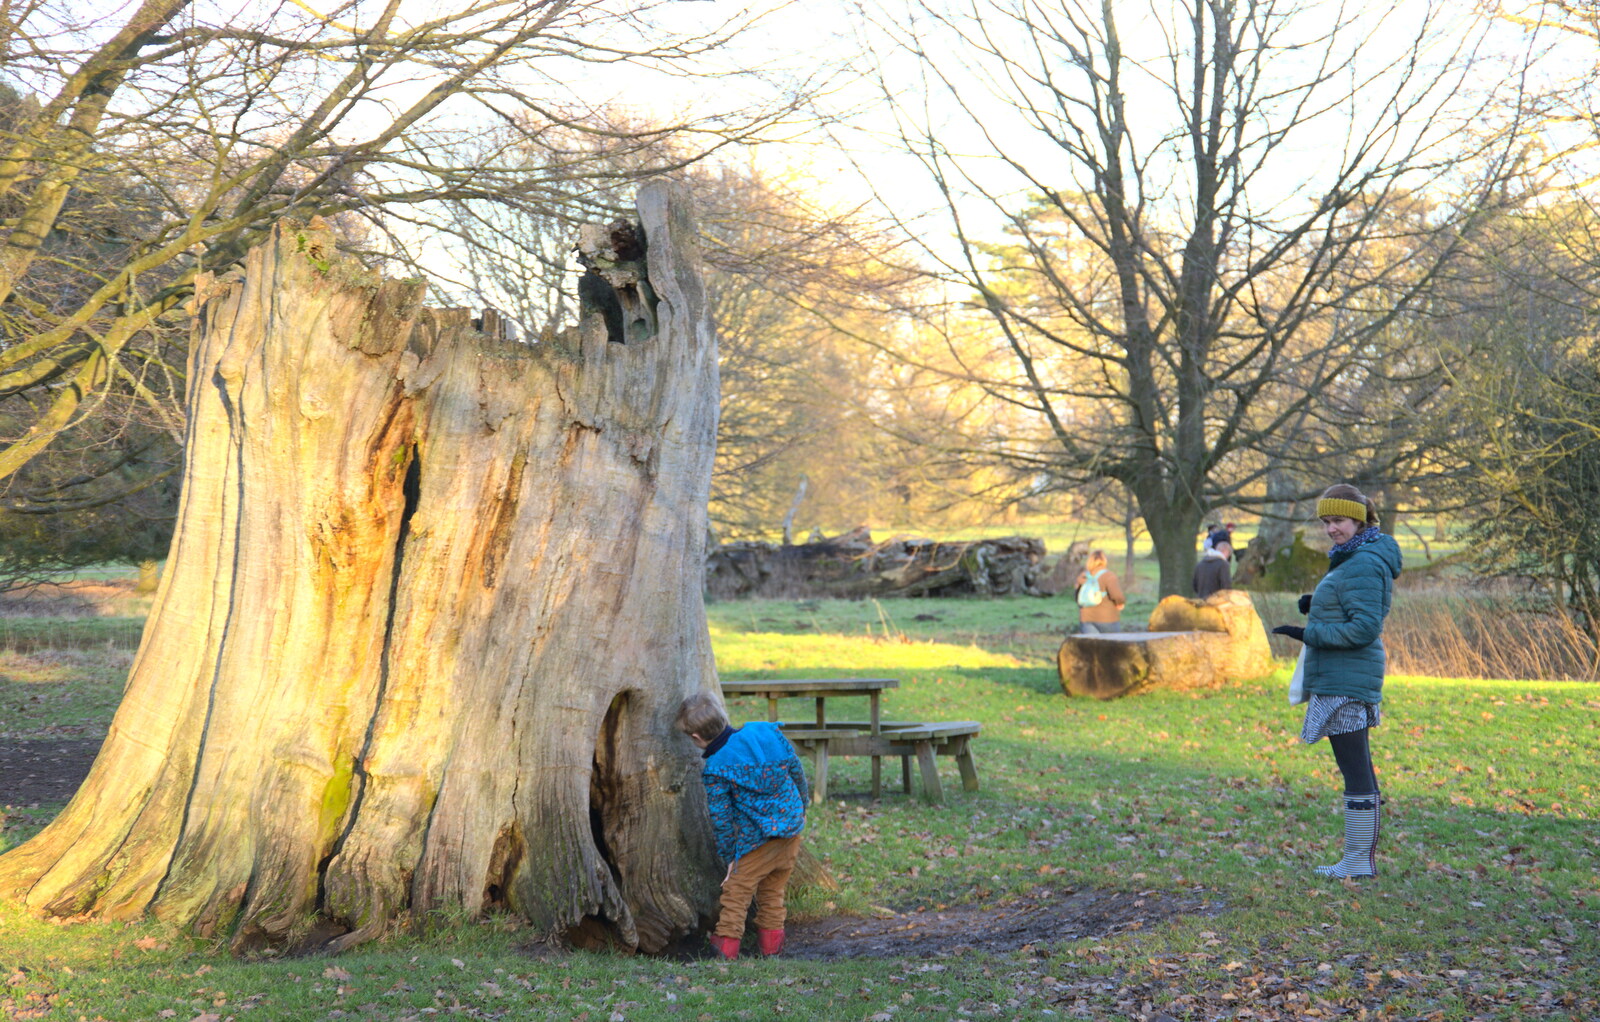 Harry checks a tree-stump out from Life Below Stairs, Ickworth House, Horringer, Suffolk - 28th January 2018